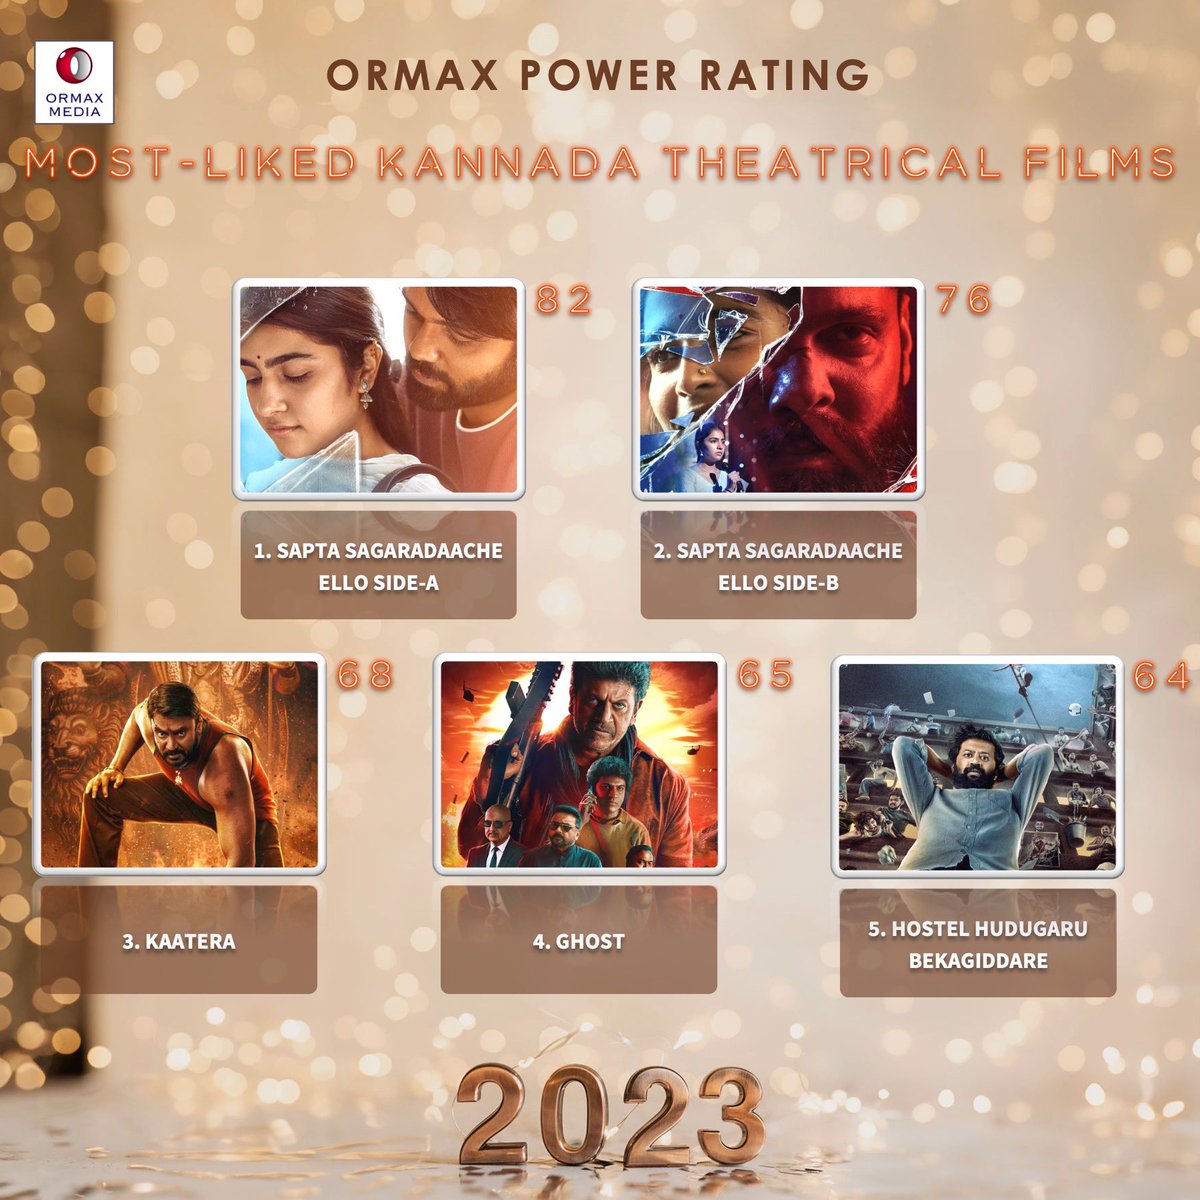 Top 5 most-liked Kannada films of 2023, based on audience engagement #Ormax2023 #OrmaxPowerRating Note: Only original Kannada language films released in theatres considered